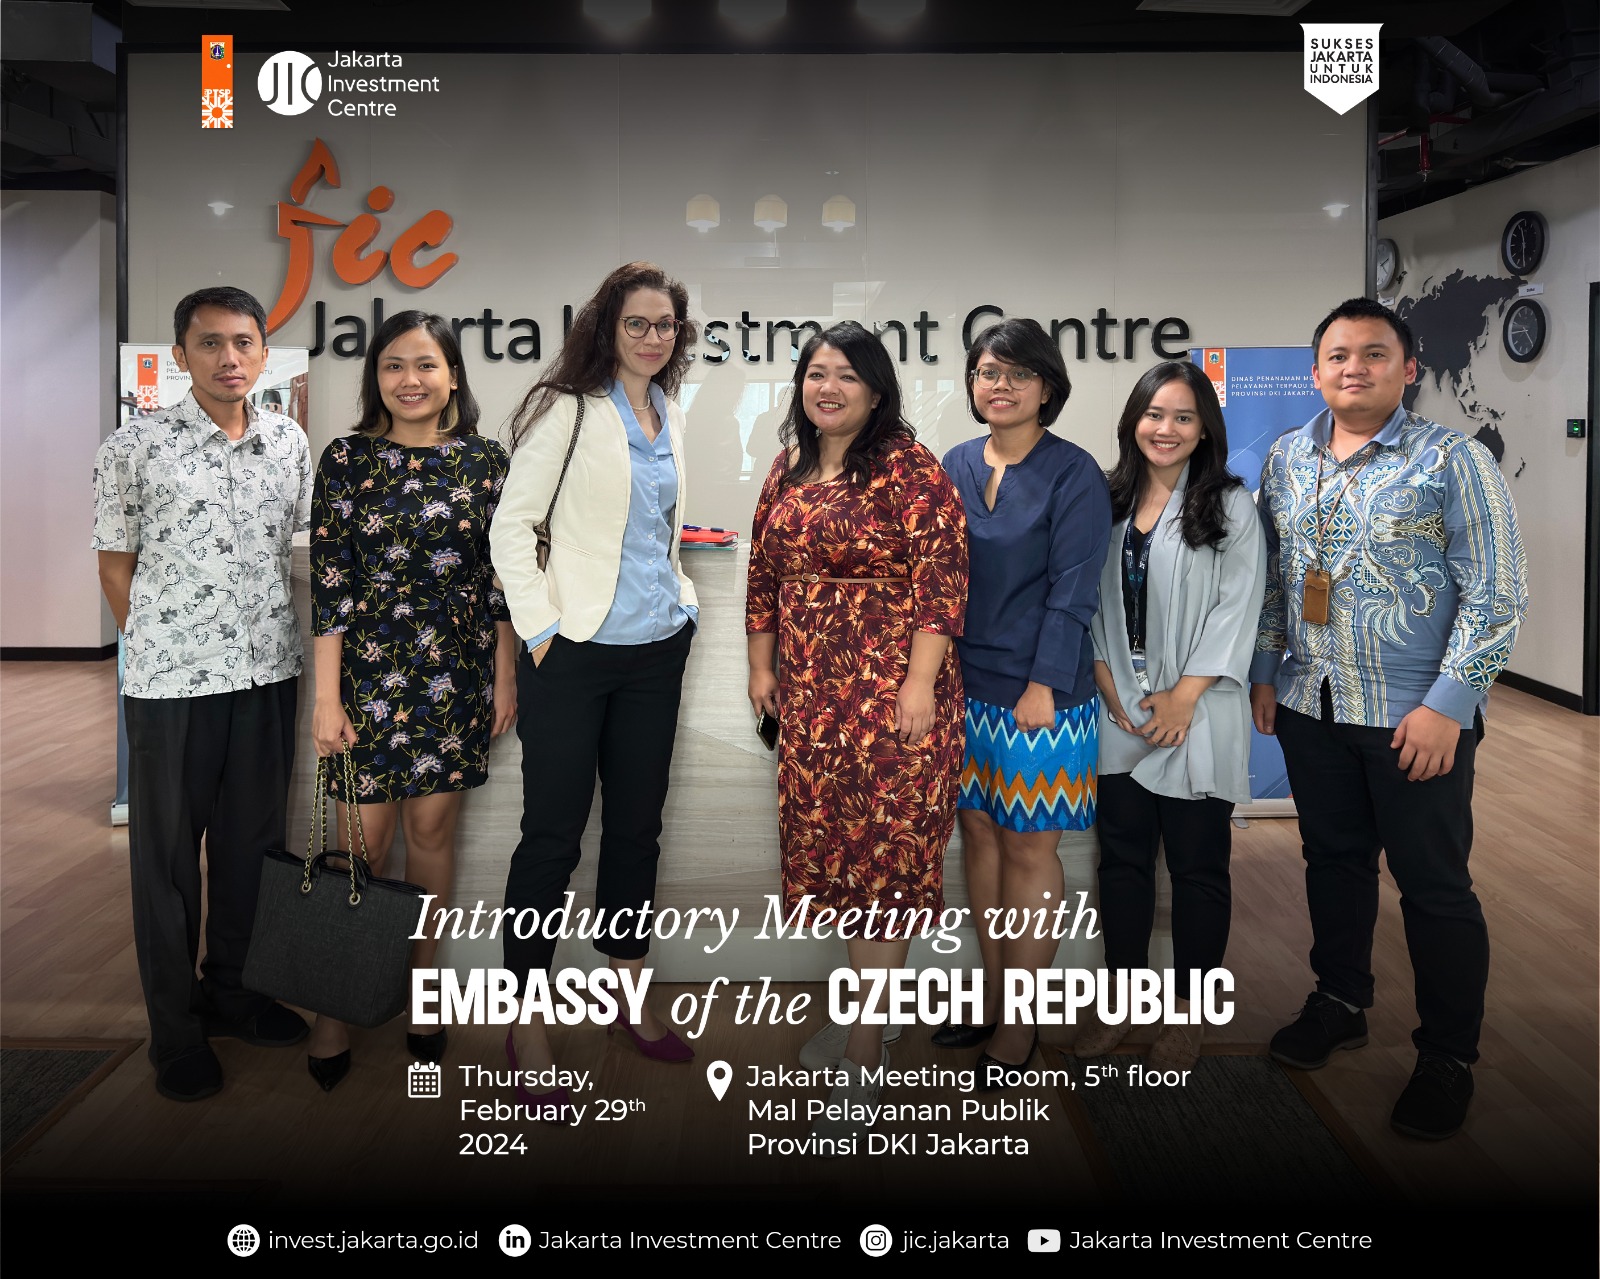 Introductory Meeting with Embassy of the Czech Republic